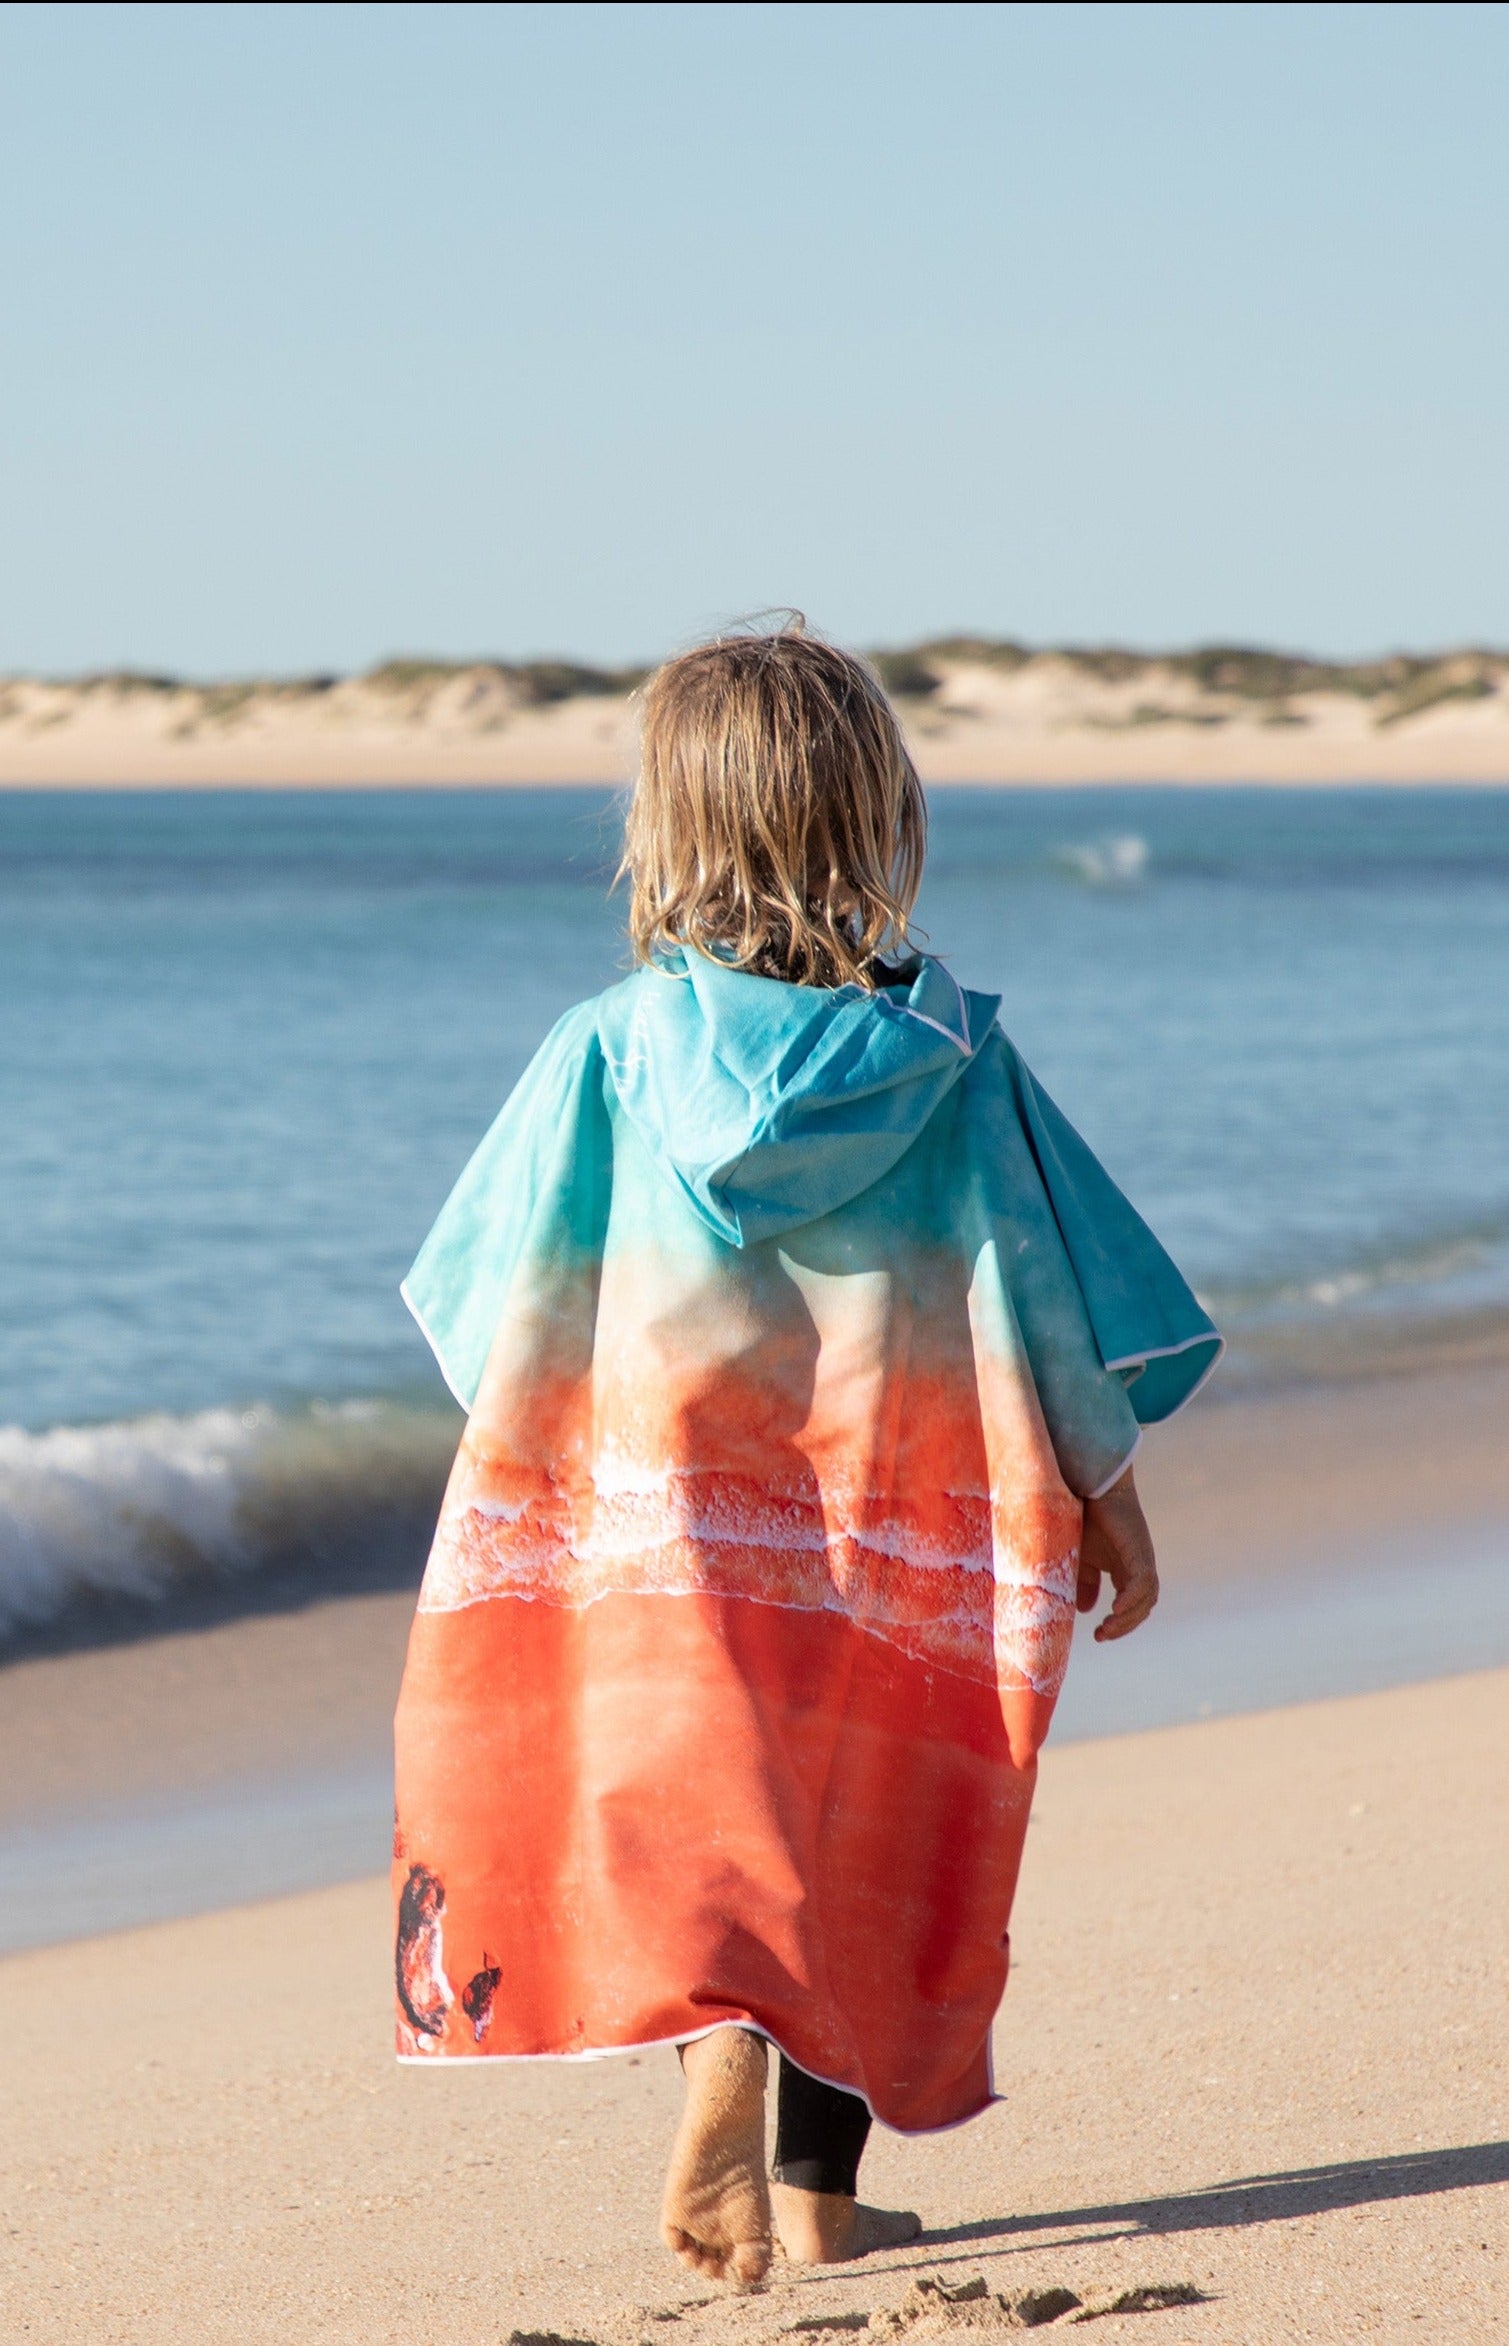 Mini Kimberley HoodedExclusive design by Trip In A VanThe Kimberley; Inspired by the turquoise blues and red pindan sands of Roebuck Bay, Broome WA Quick Dry Kids Hooded TowelFor the beach, travelling, camping, swimming lessons and more!Sustainably made using post-consumer plastic bottles in the form of recycled Polyester (rPET)$57.99Will and Wind